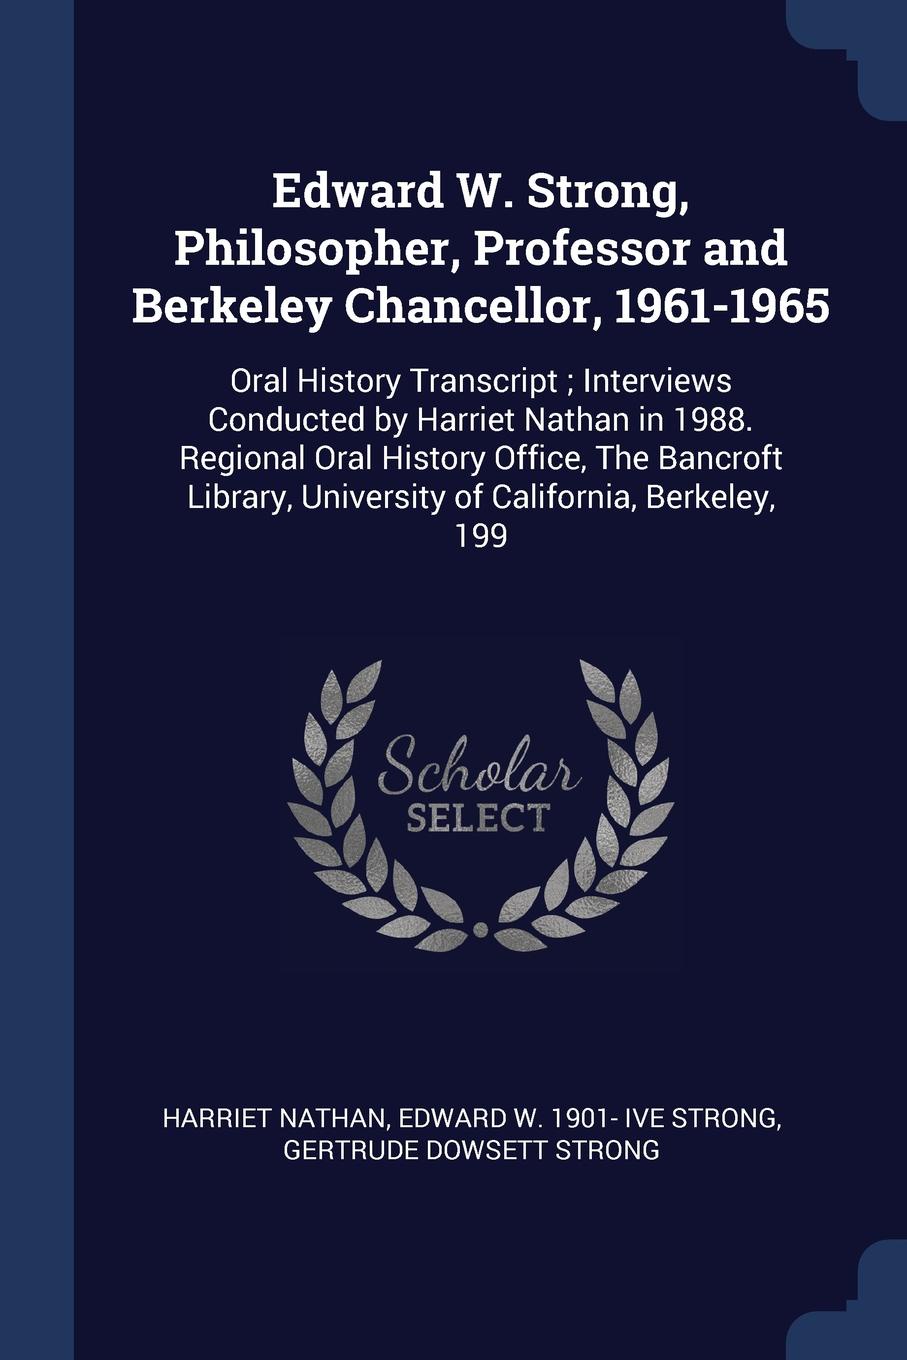 Edward W. Strong, Philosopher, Professor and Berkeley Chancellor, 1961-1965. Oral History Transcript ; Interviews Conducted by Harriet Nathan in 1988. Regional Oral History Office, The Bancroft Library, University of California, Berkeley, 199